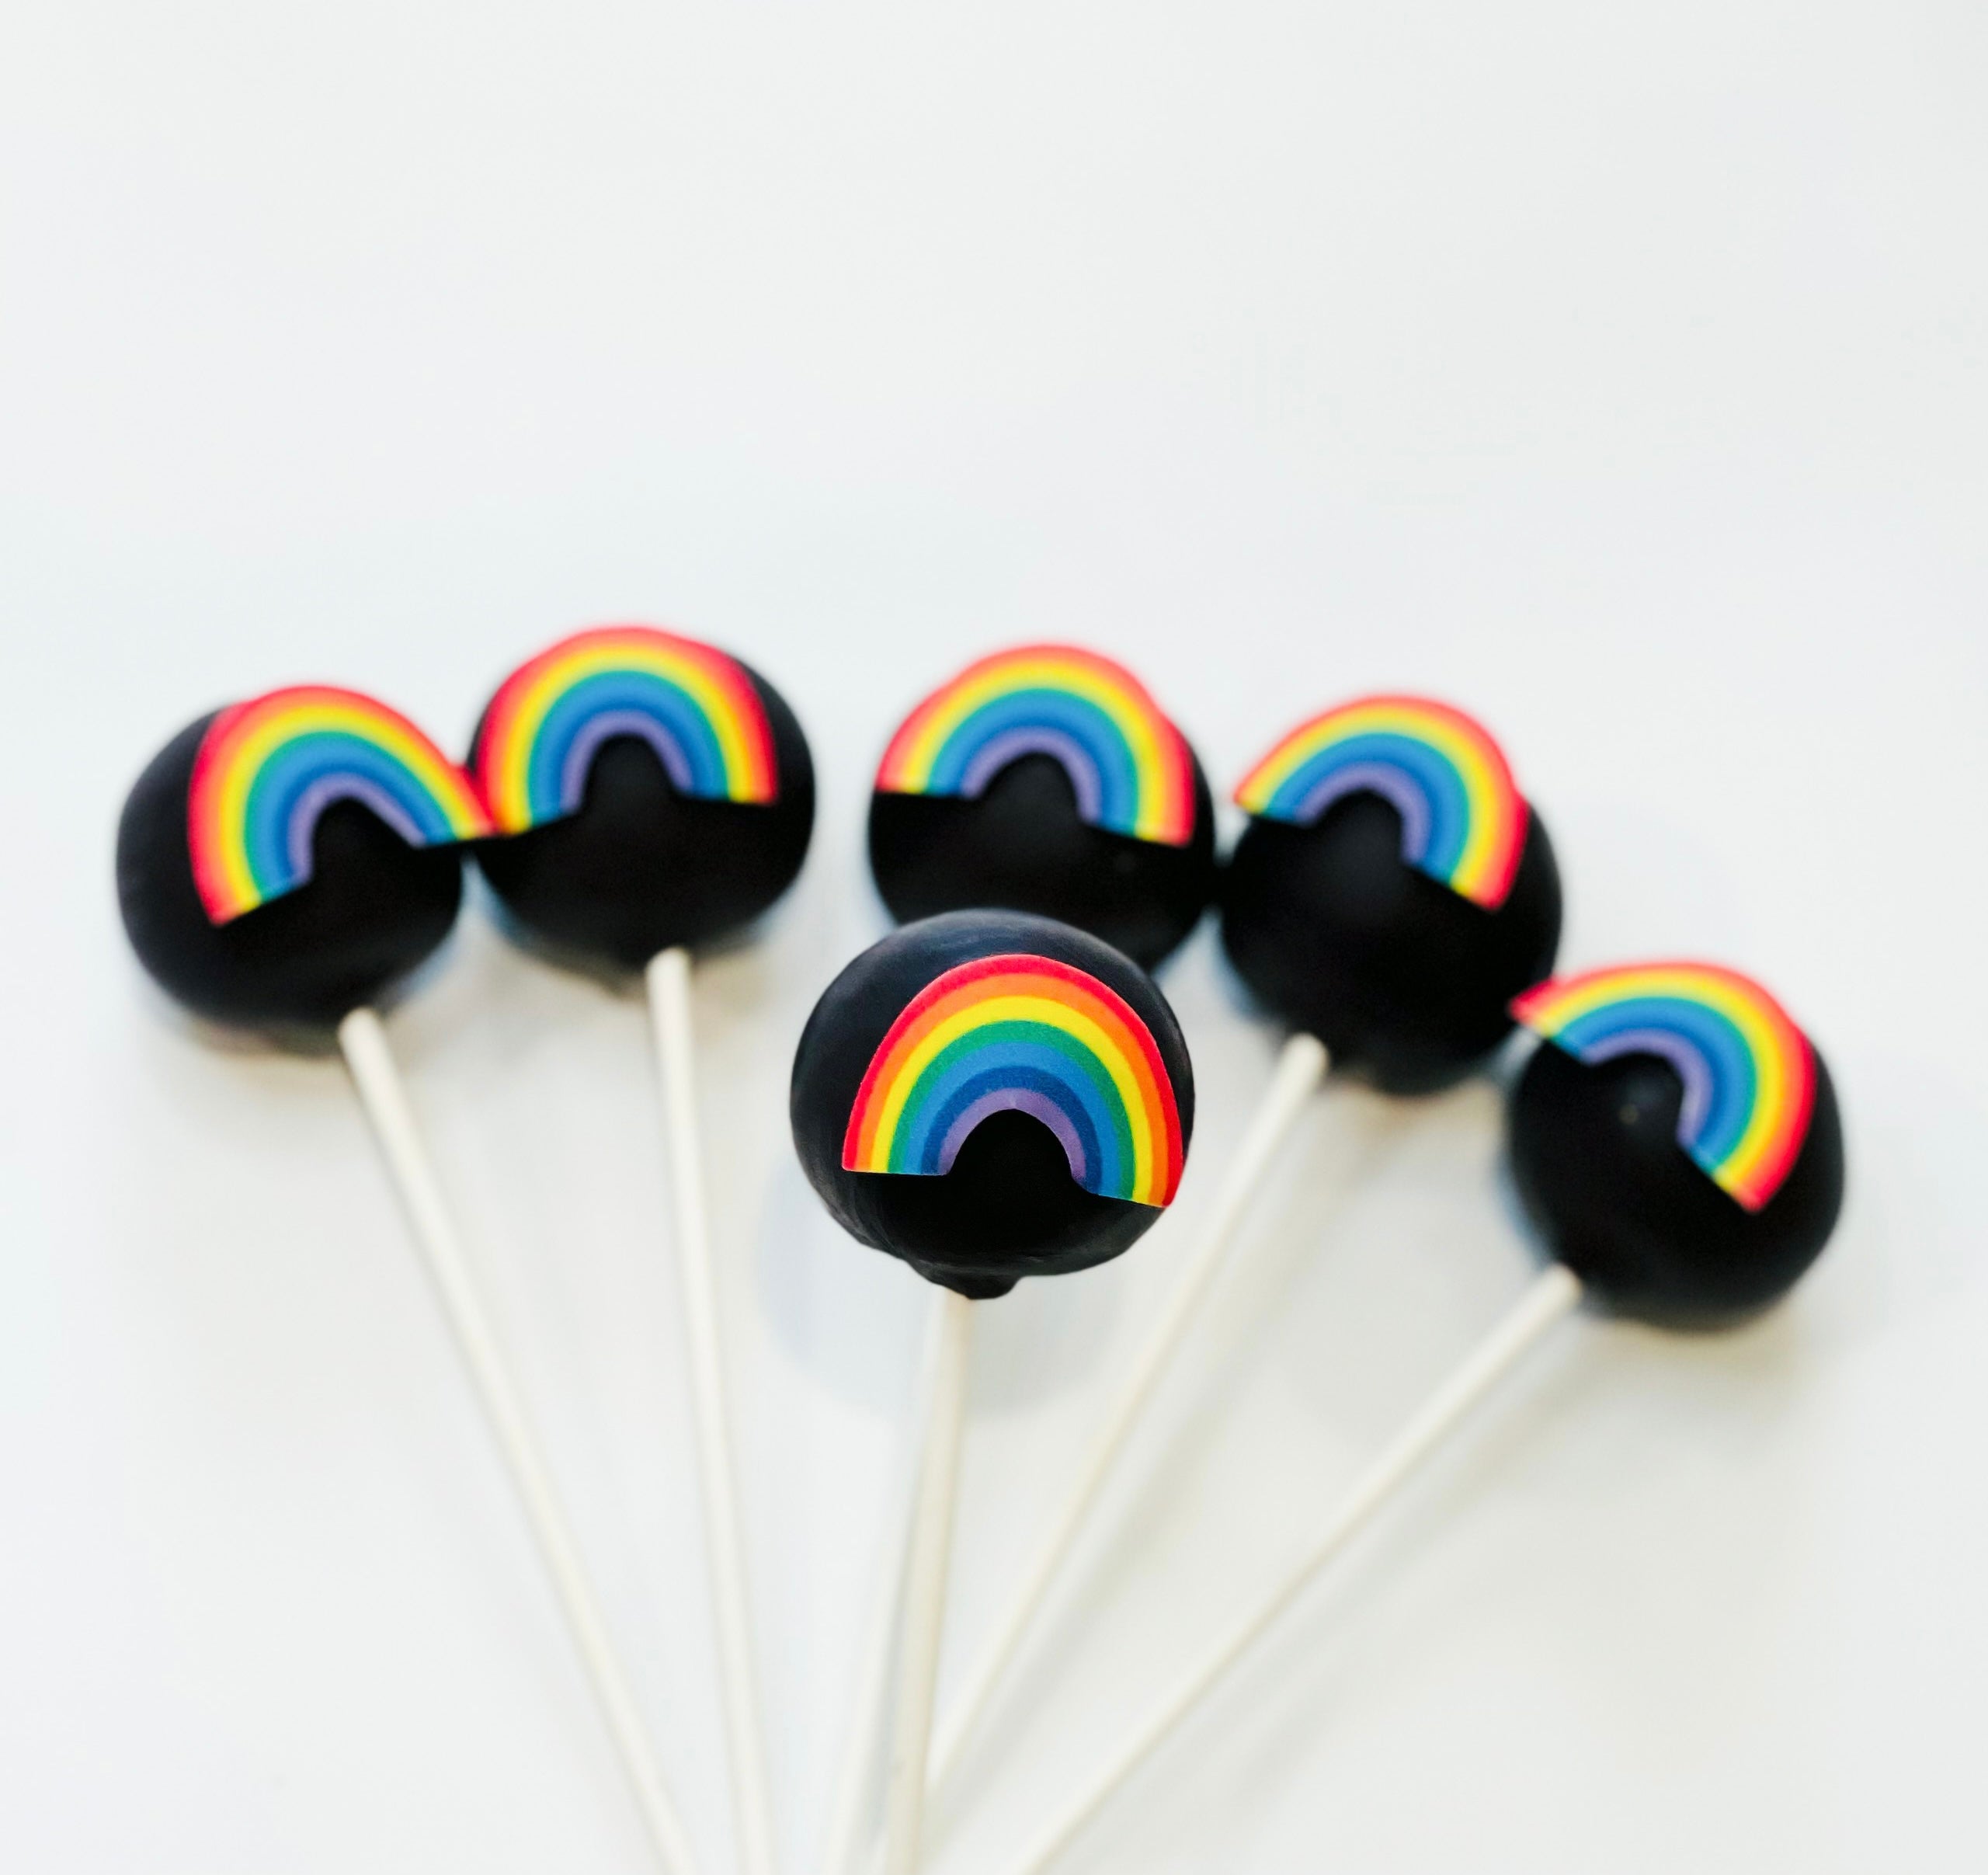 Taste the Rainbow With These Amazing Colorful Cake Pops